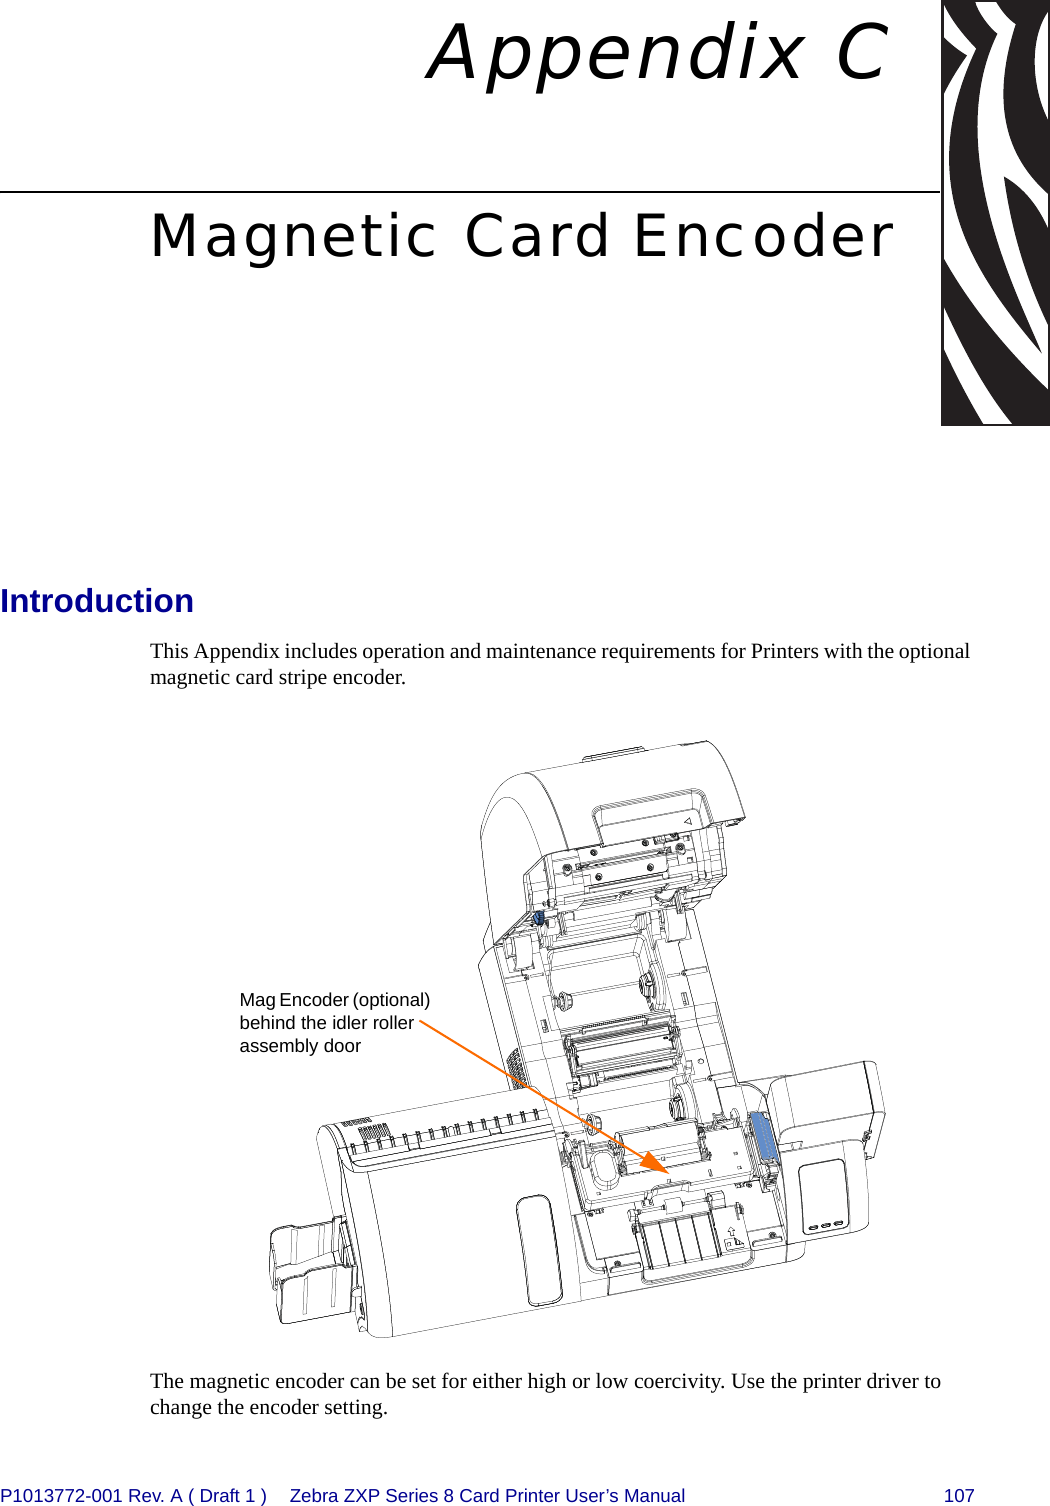 P1013772-001 Rev. A ( Draft 1 ) Zebra ZXP Series 8 Card Printer User’s Manual 107Appendix CMagnetic Card EncoderIntroductionThis Appendix includes operation and maintenance requirements for Printers with the optional magnetic card stripe encoder.The magnetic encoder can be set for either high or low coercivity. Use the printer driver to change the encoder setting.Mag Encoder (optional) behind the idler roller assembly door